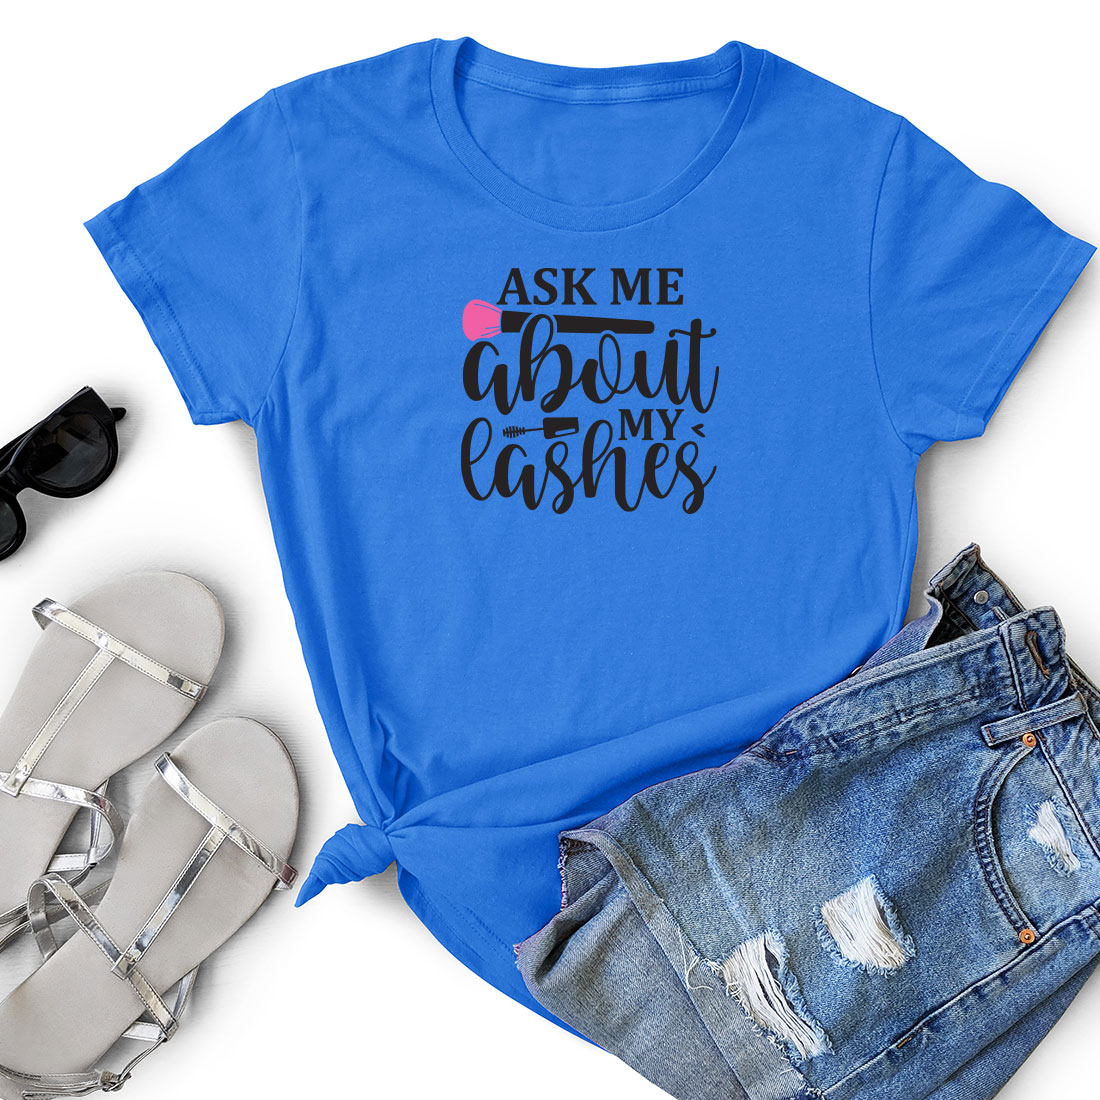 T - shirt that says ask me about my clothes.